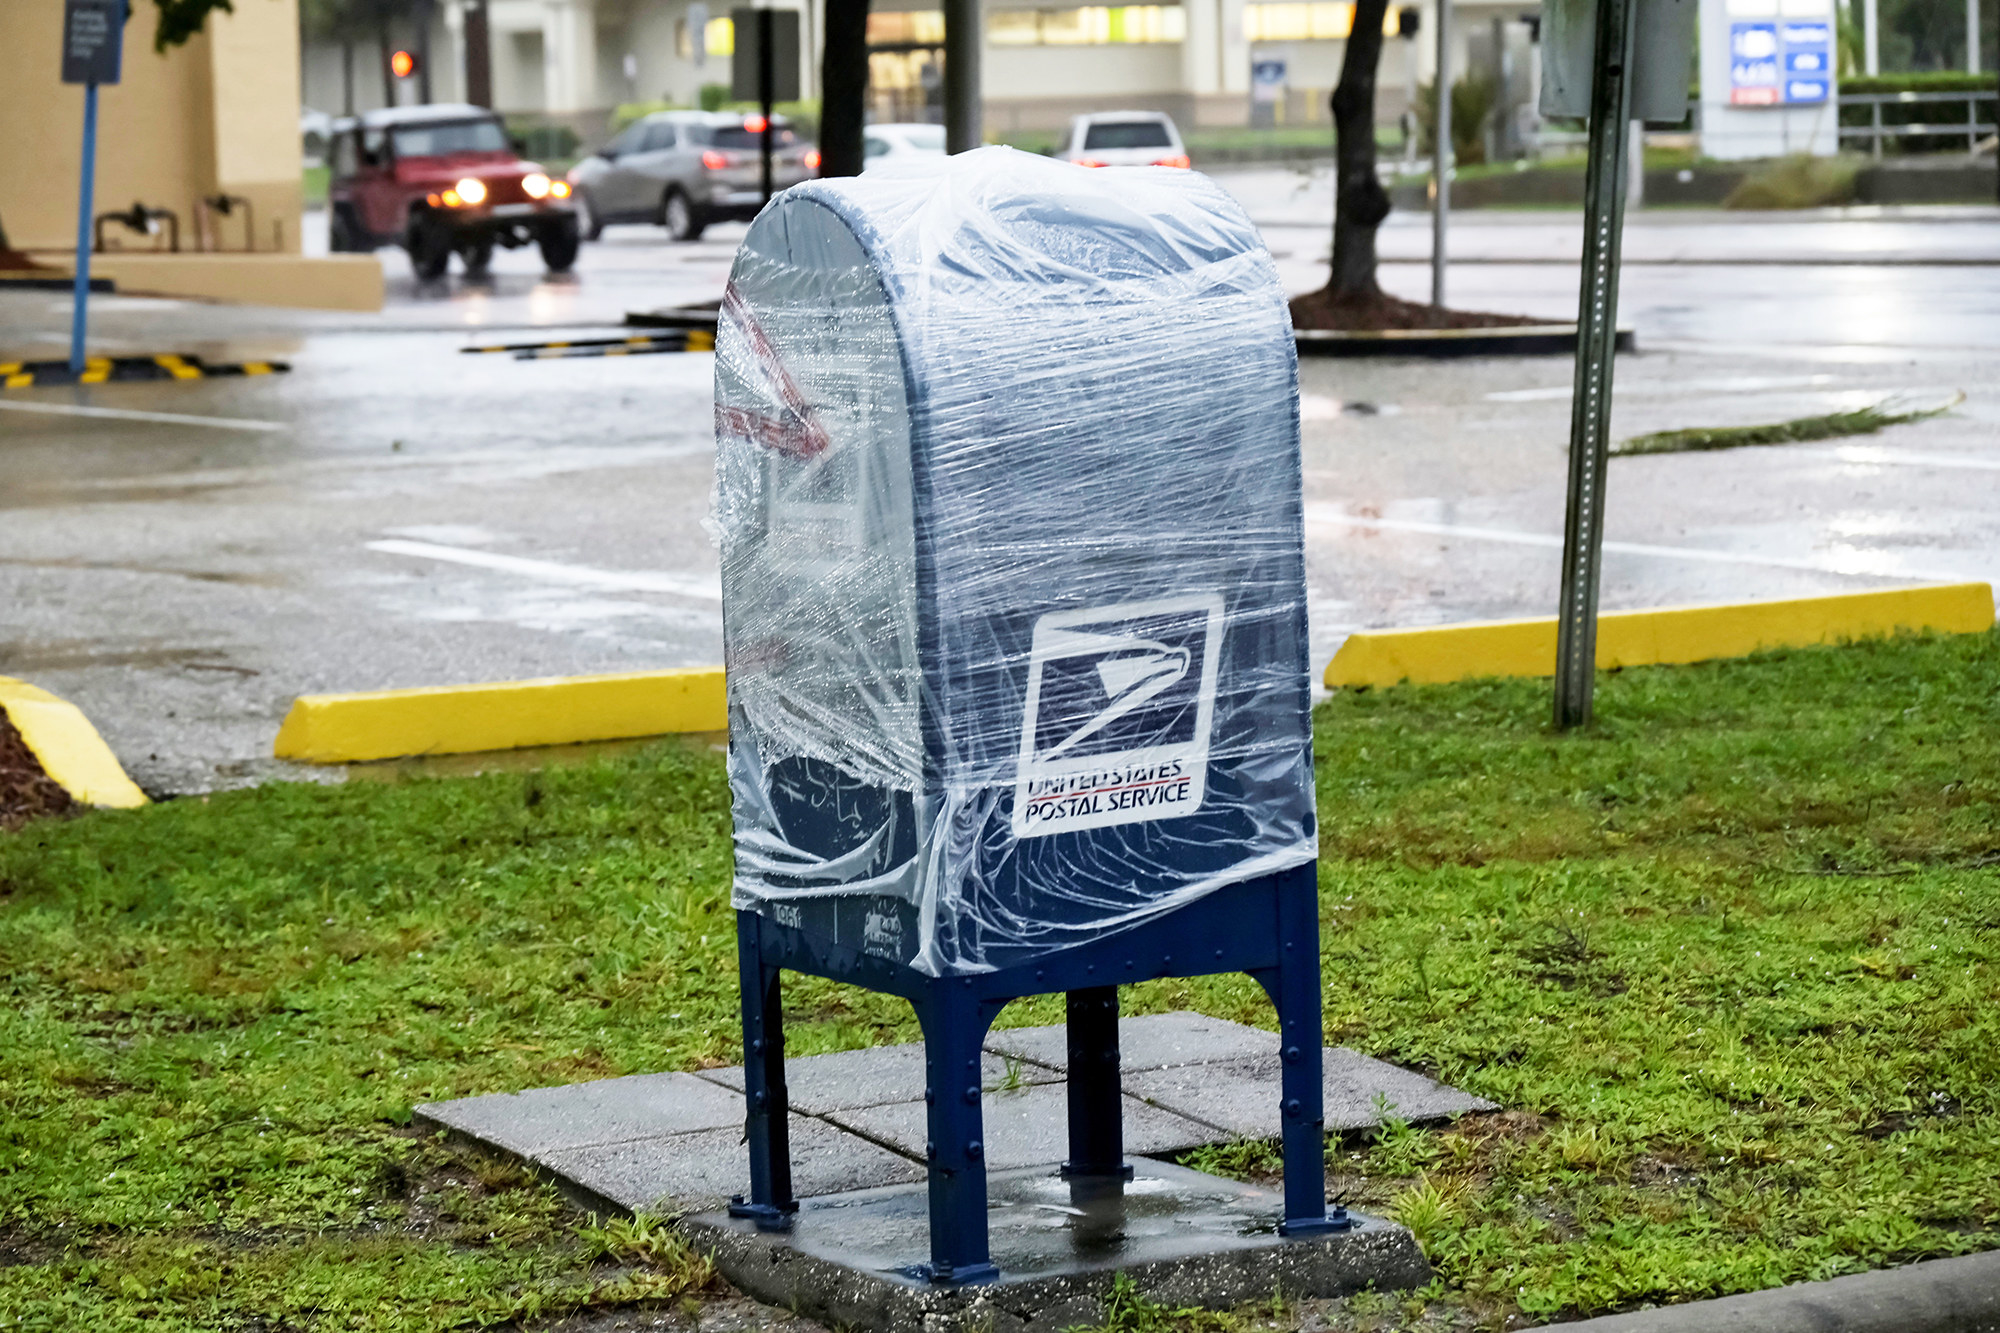 A public mailbox stands encased in shrink wrap